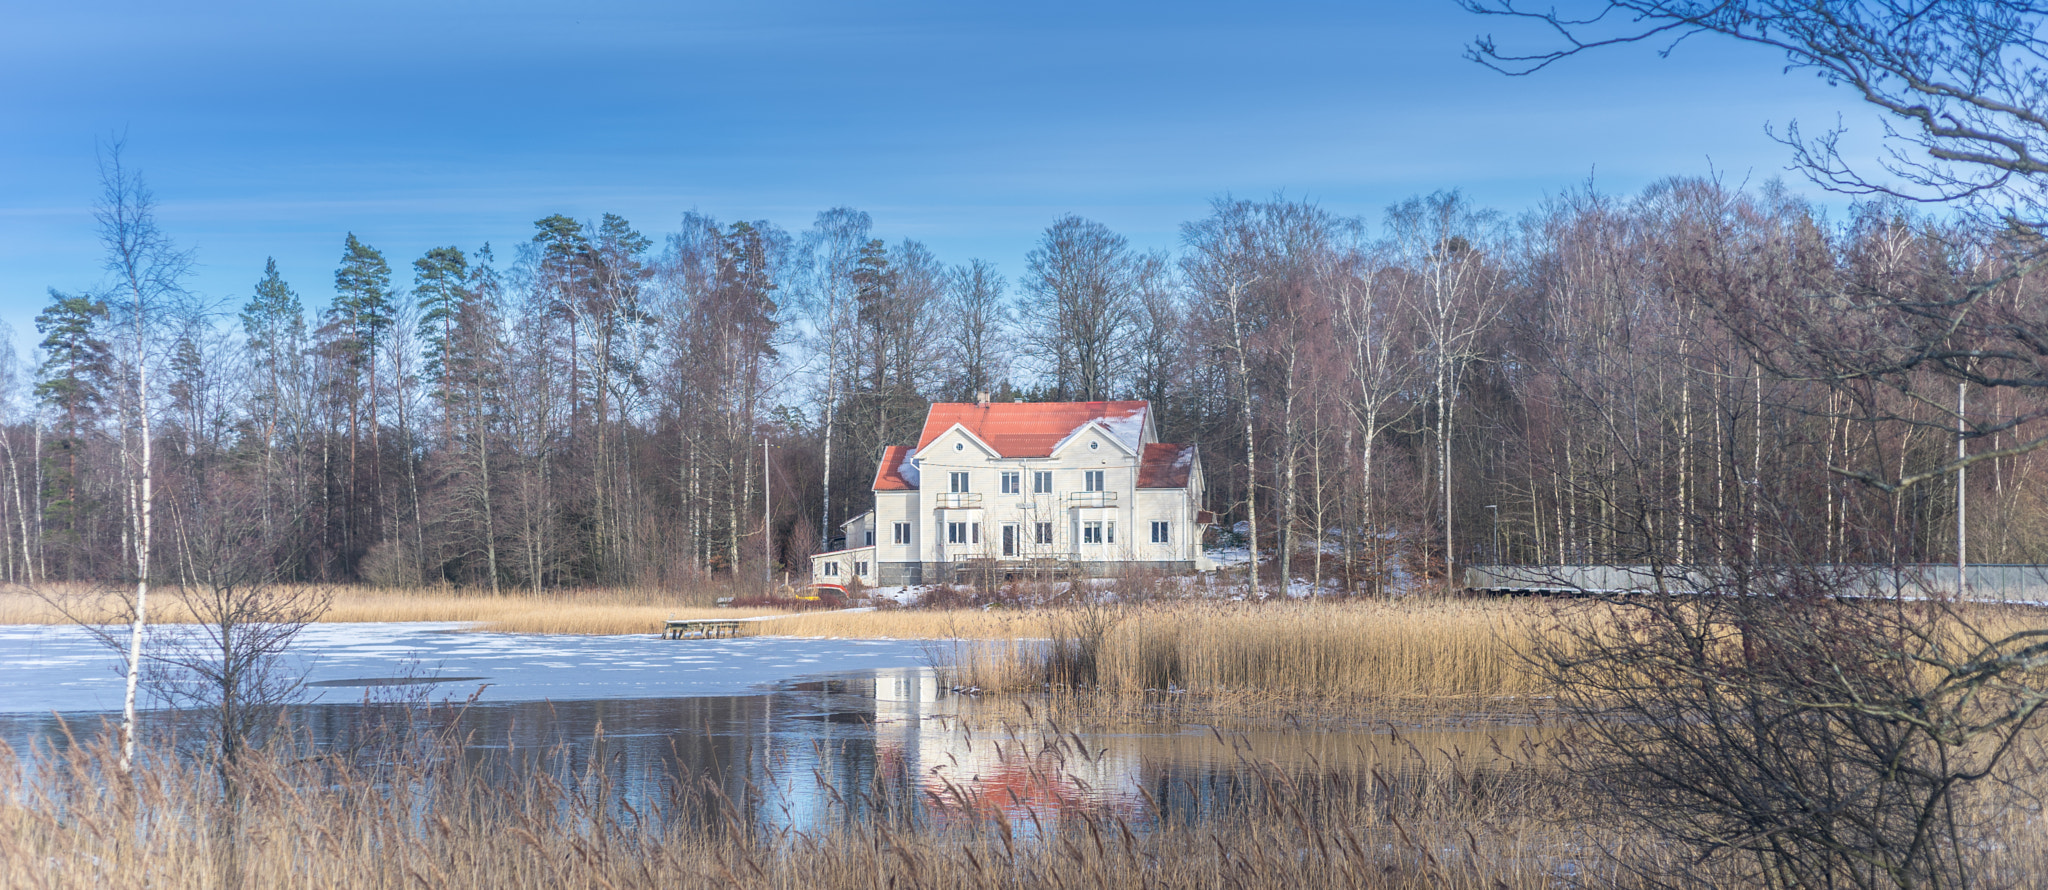 Sony a7 II + Canon EF 50mm F1.8 STM sample photo. House on the lake photography